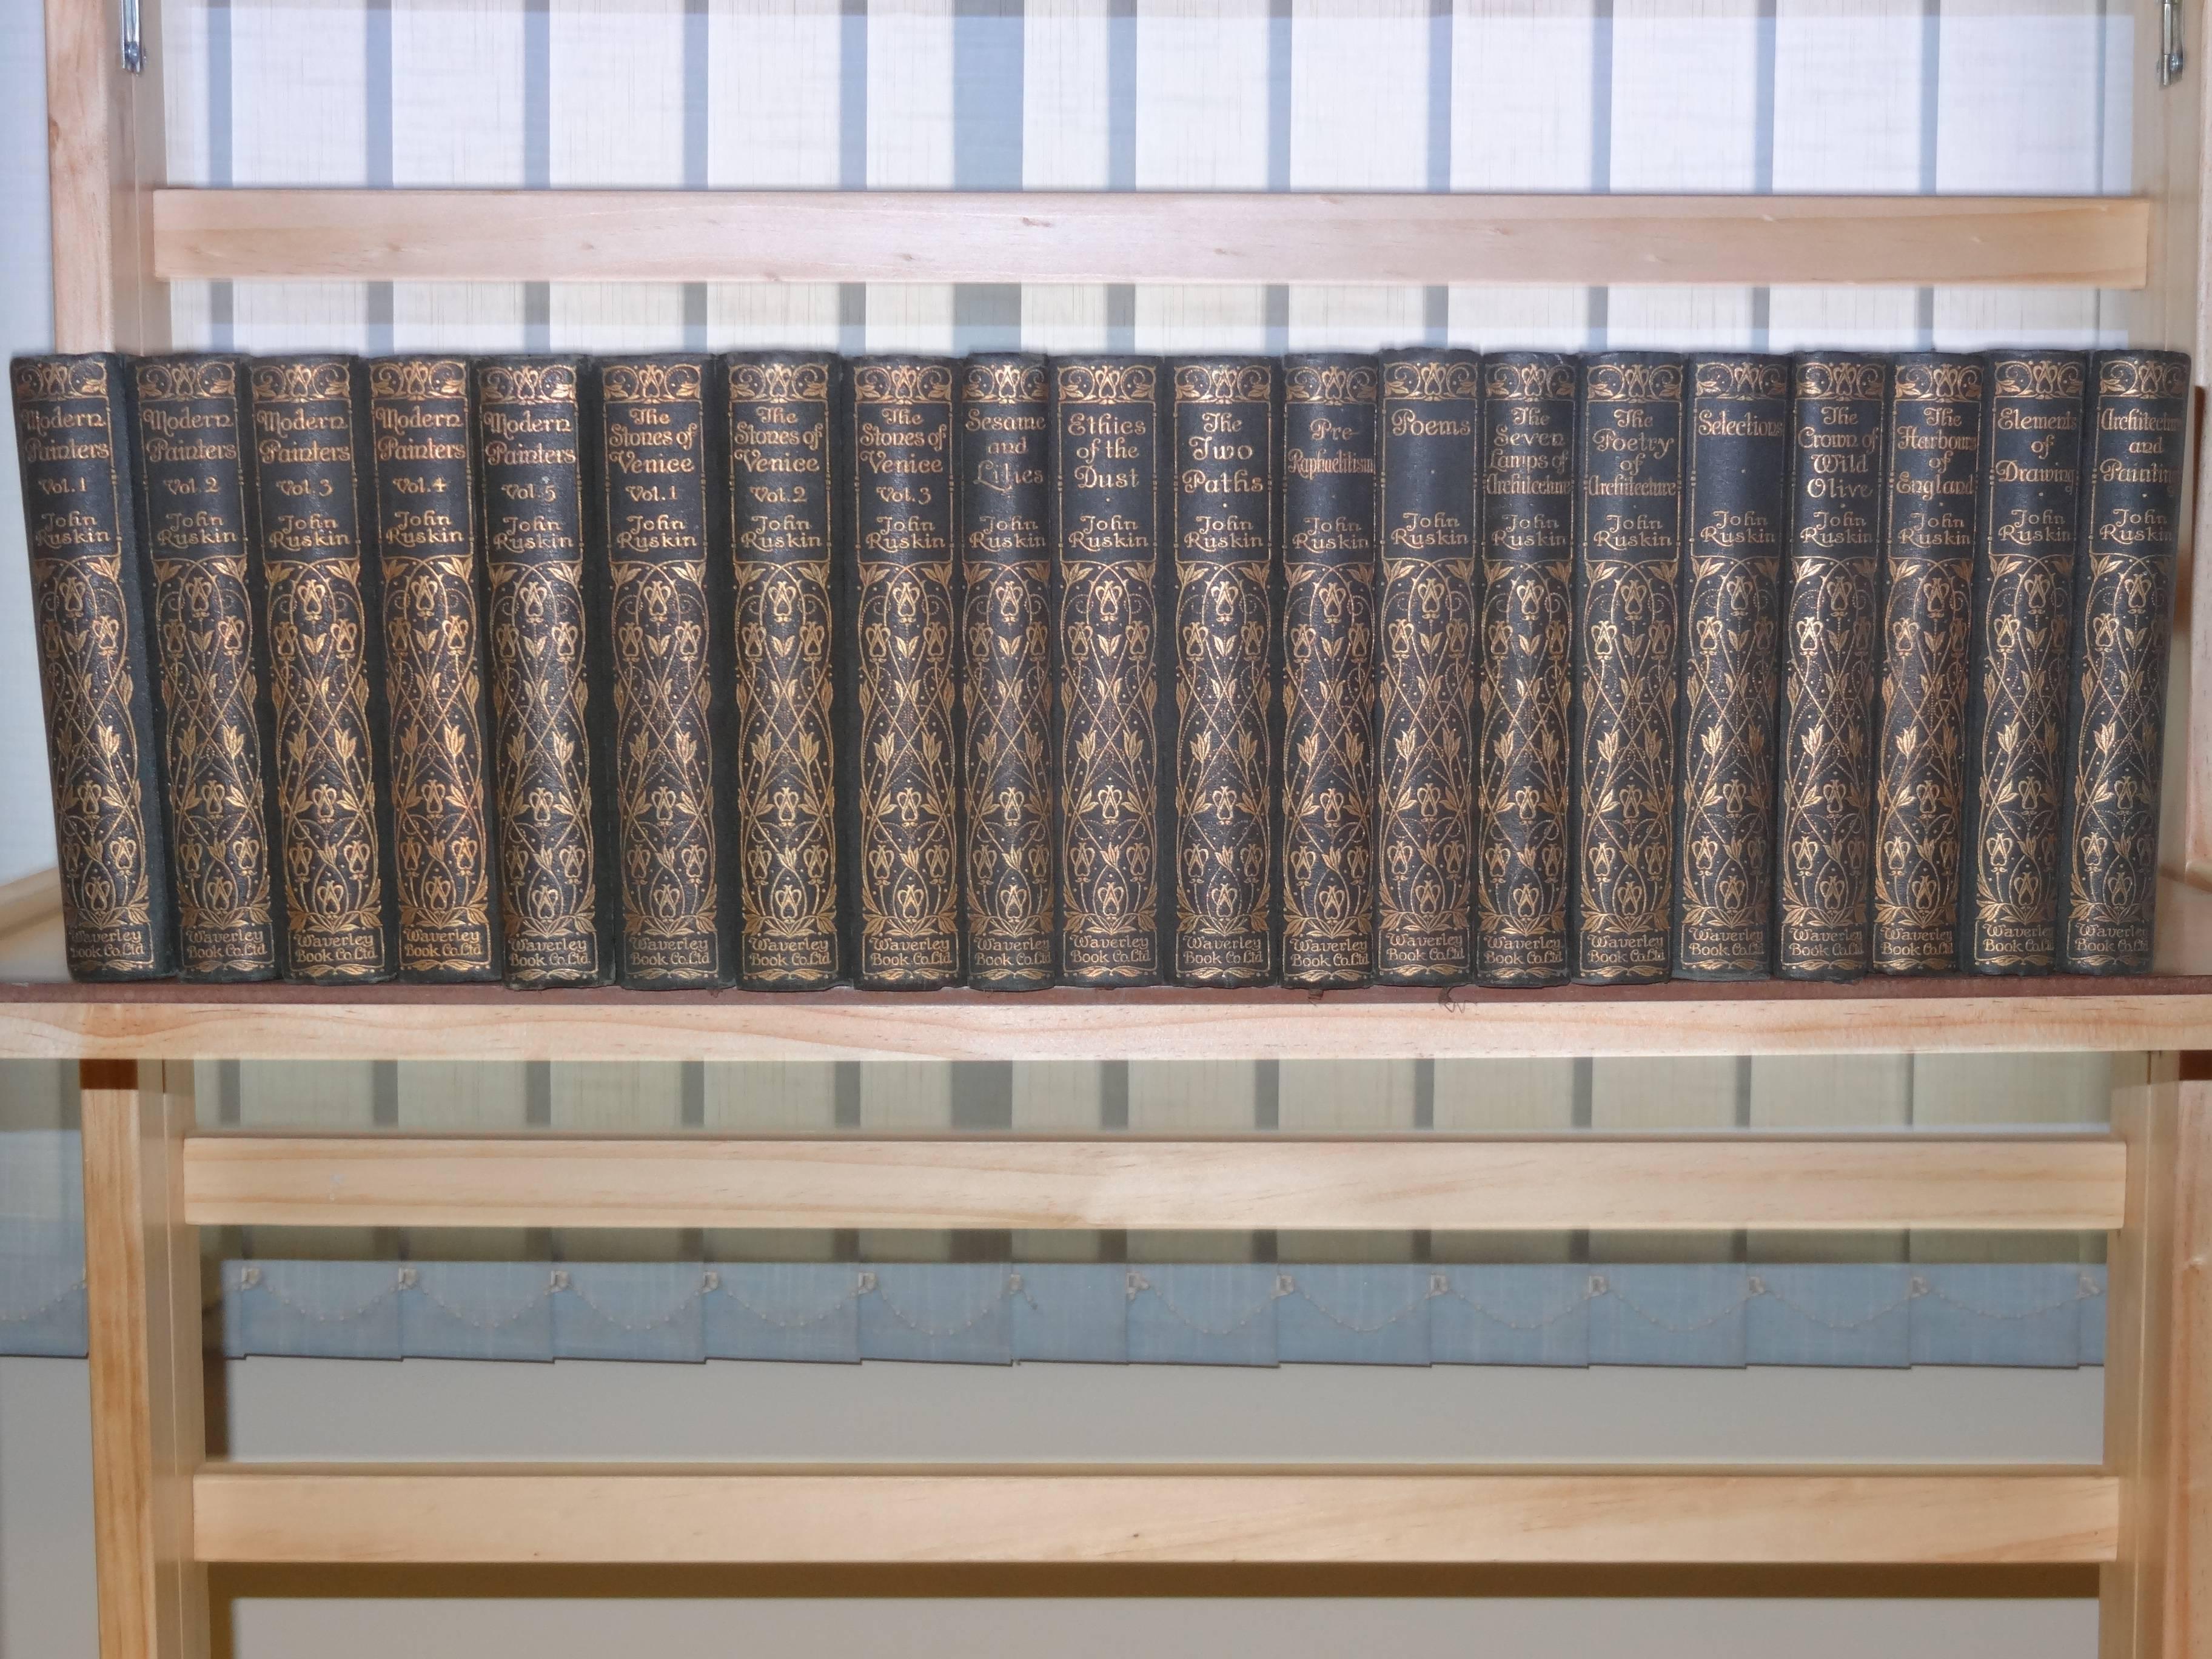 Pressed Works of John Ruskin in 20 Volumes For Sale